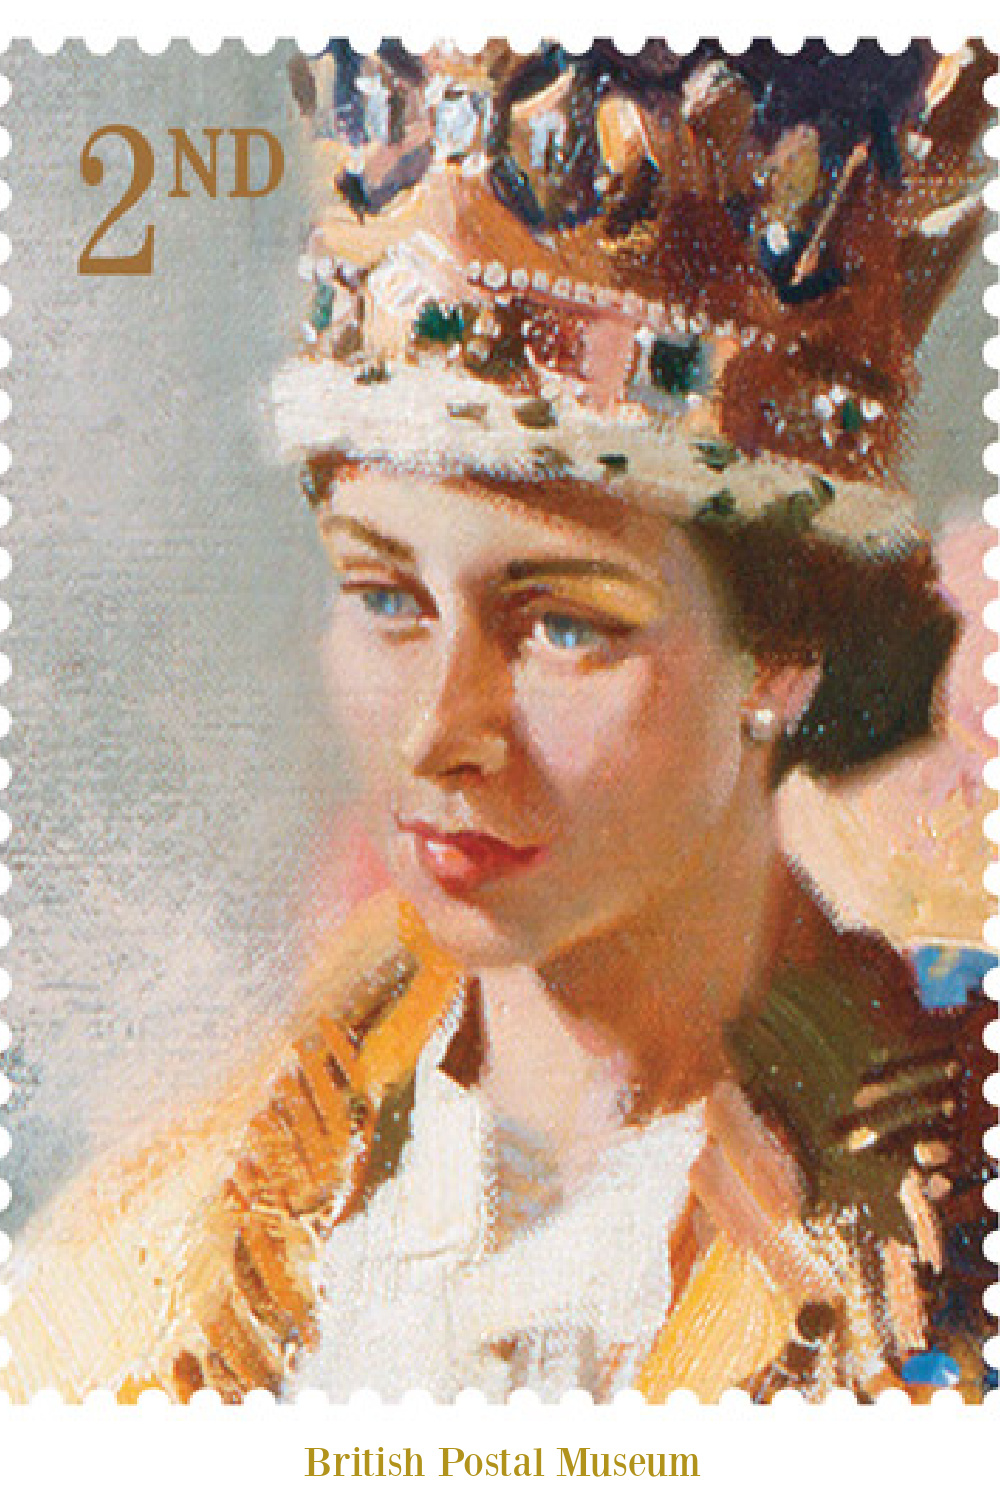 Young Queen Elizabeth II on postage stamp - British Postal Museum. #queenelizabethII #queenelizabethstamp